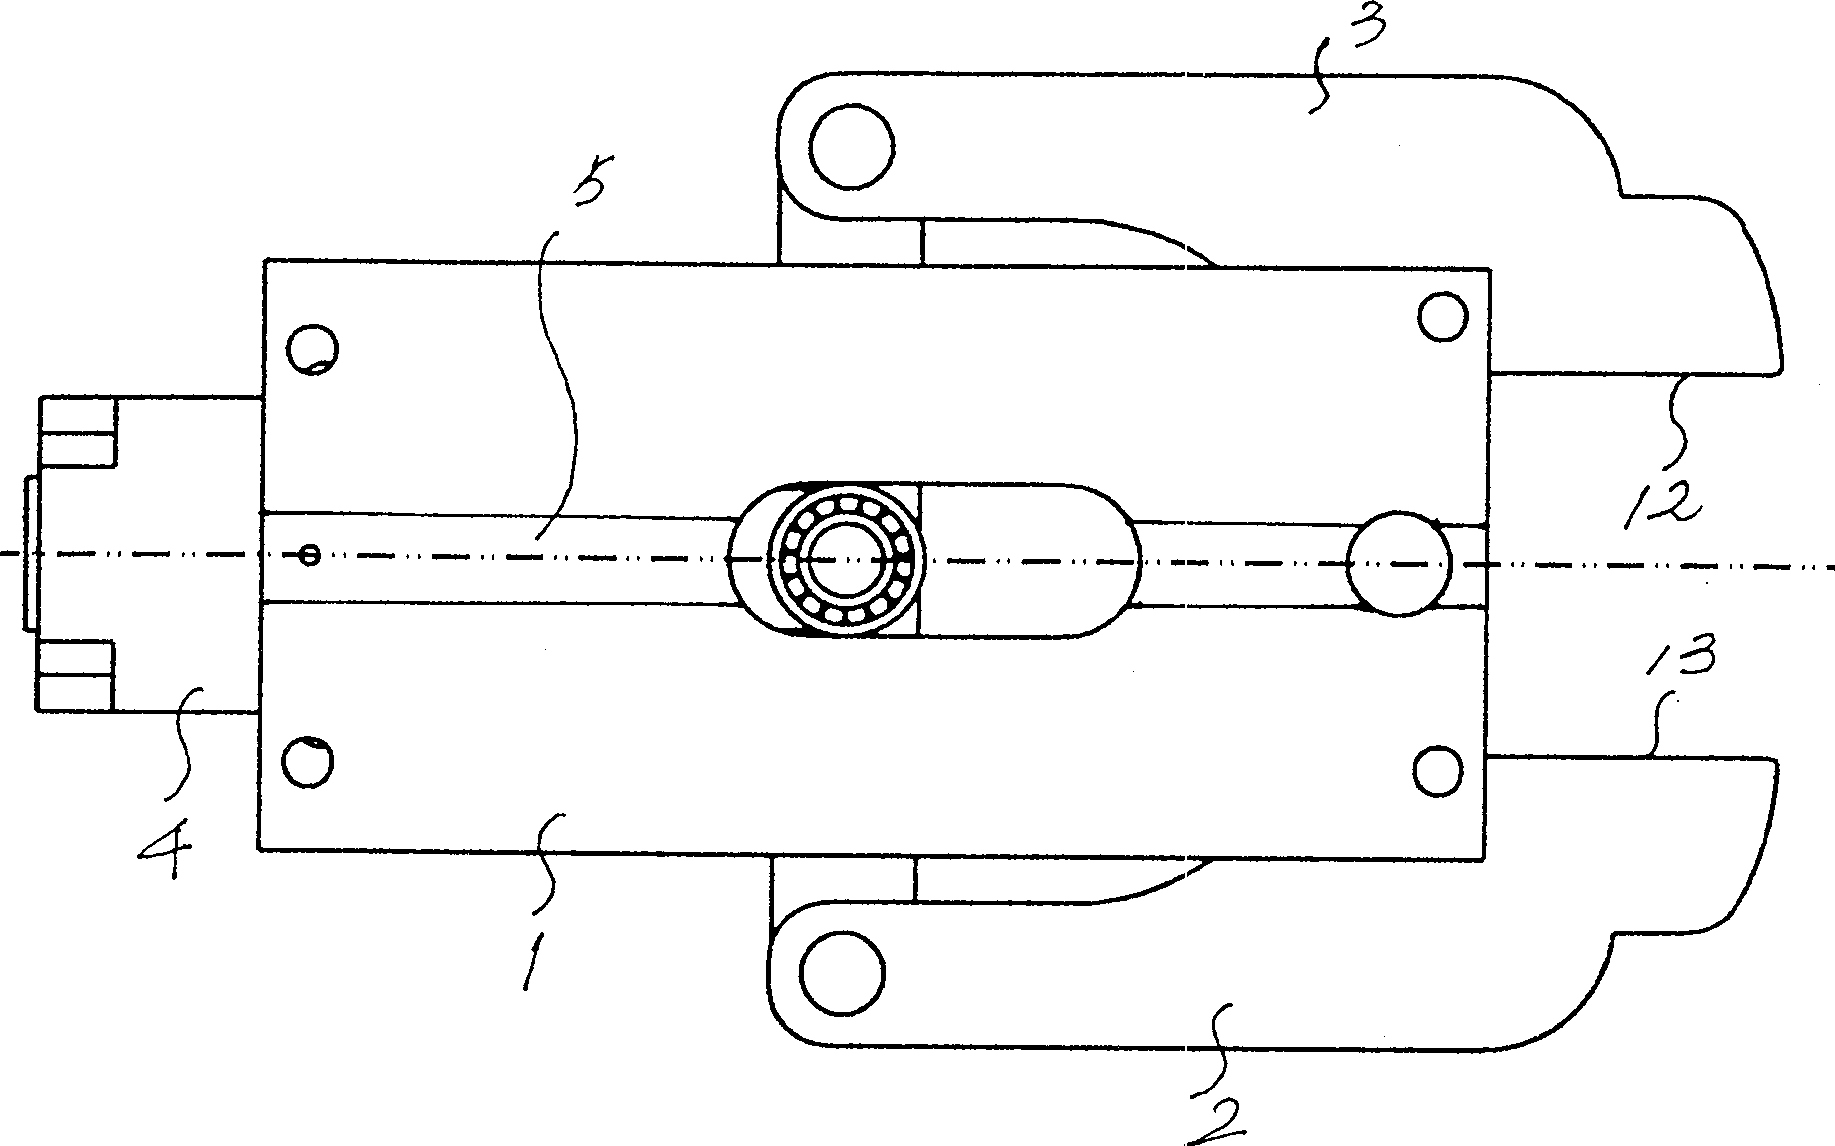 Reciprocating open type equipment for fetching and sending semi-finished bottles or shaped bottles